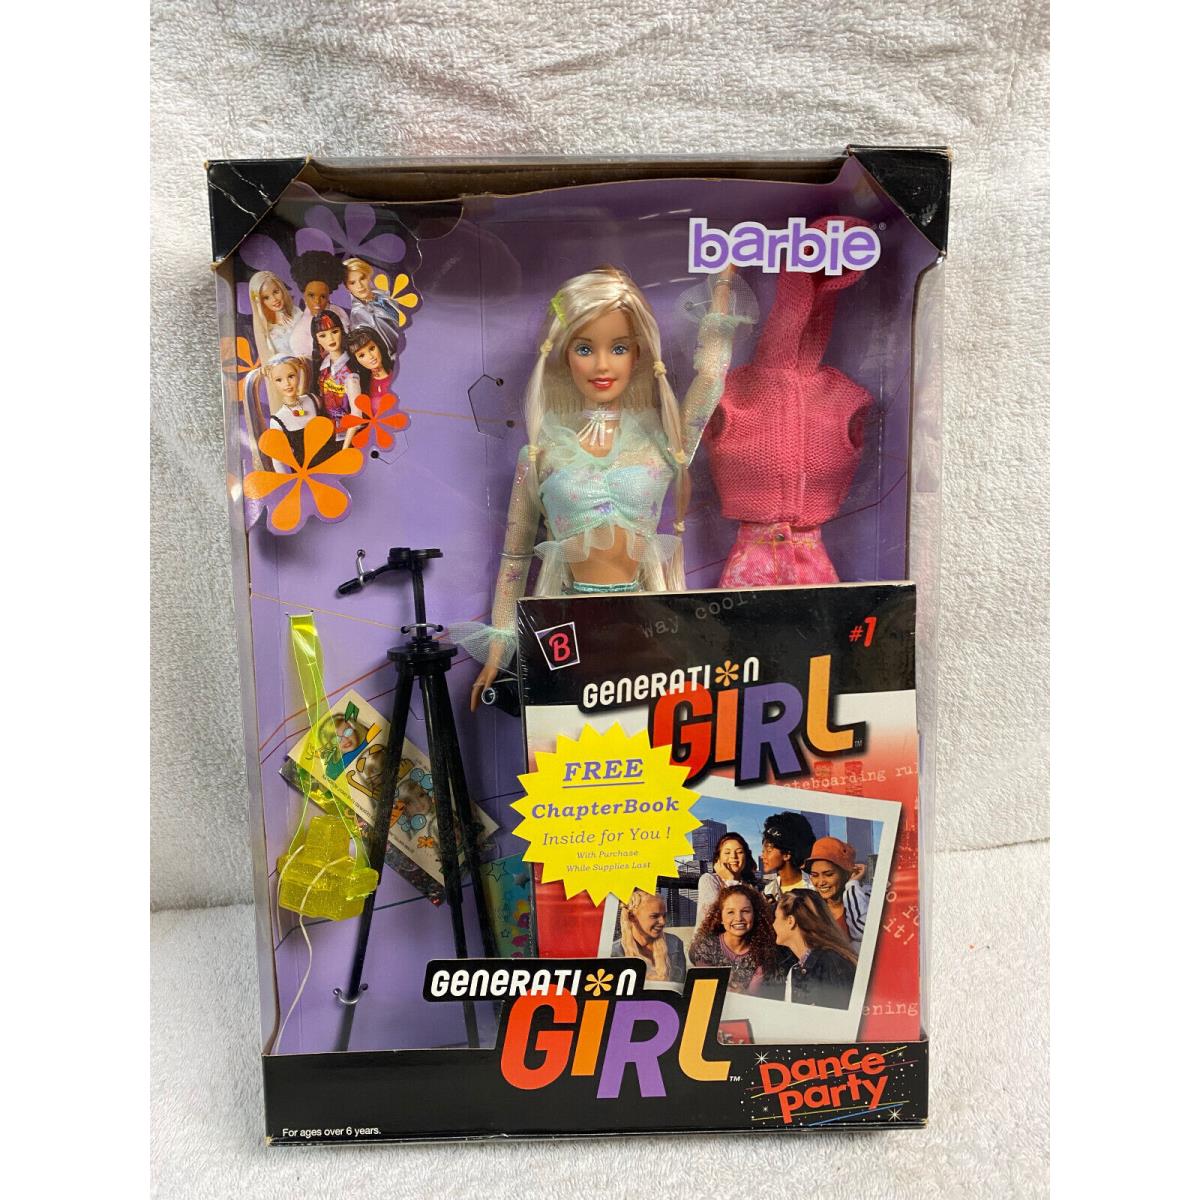 Barbie Generation Girl Doll Dance Party 1999 Mattel Blonde Years Toy 25766